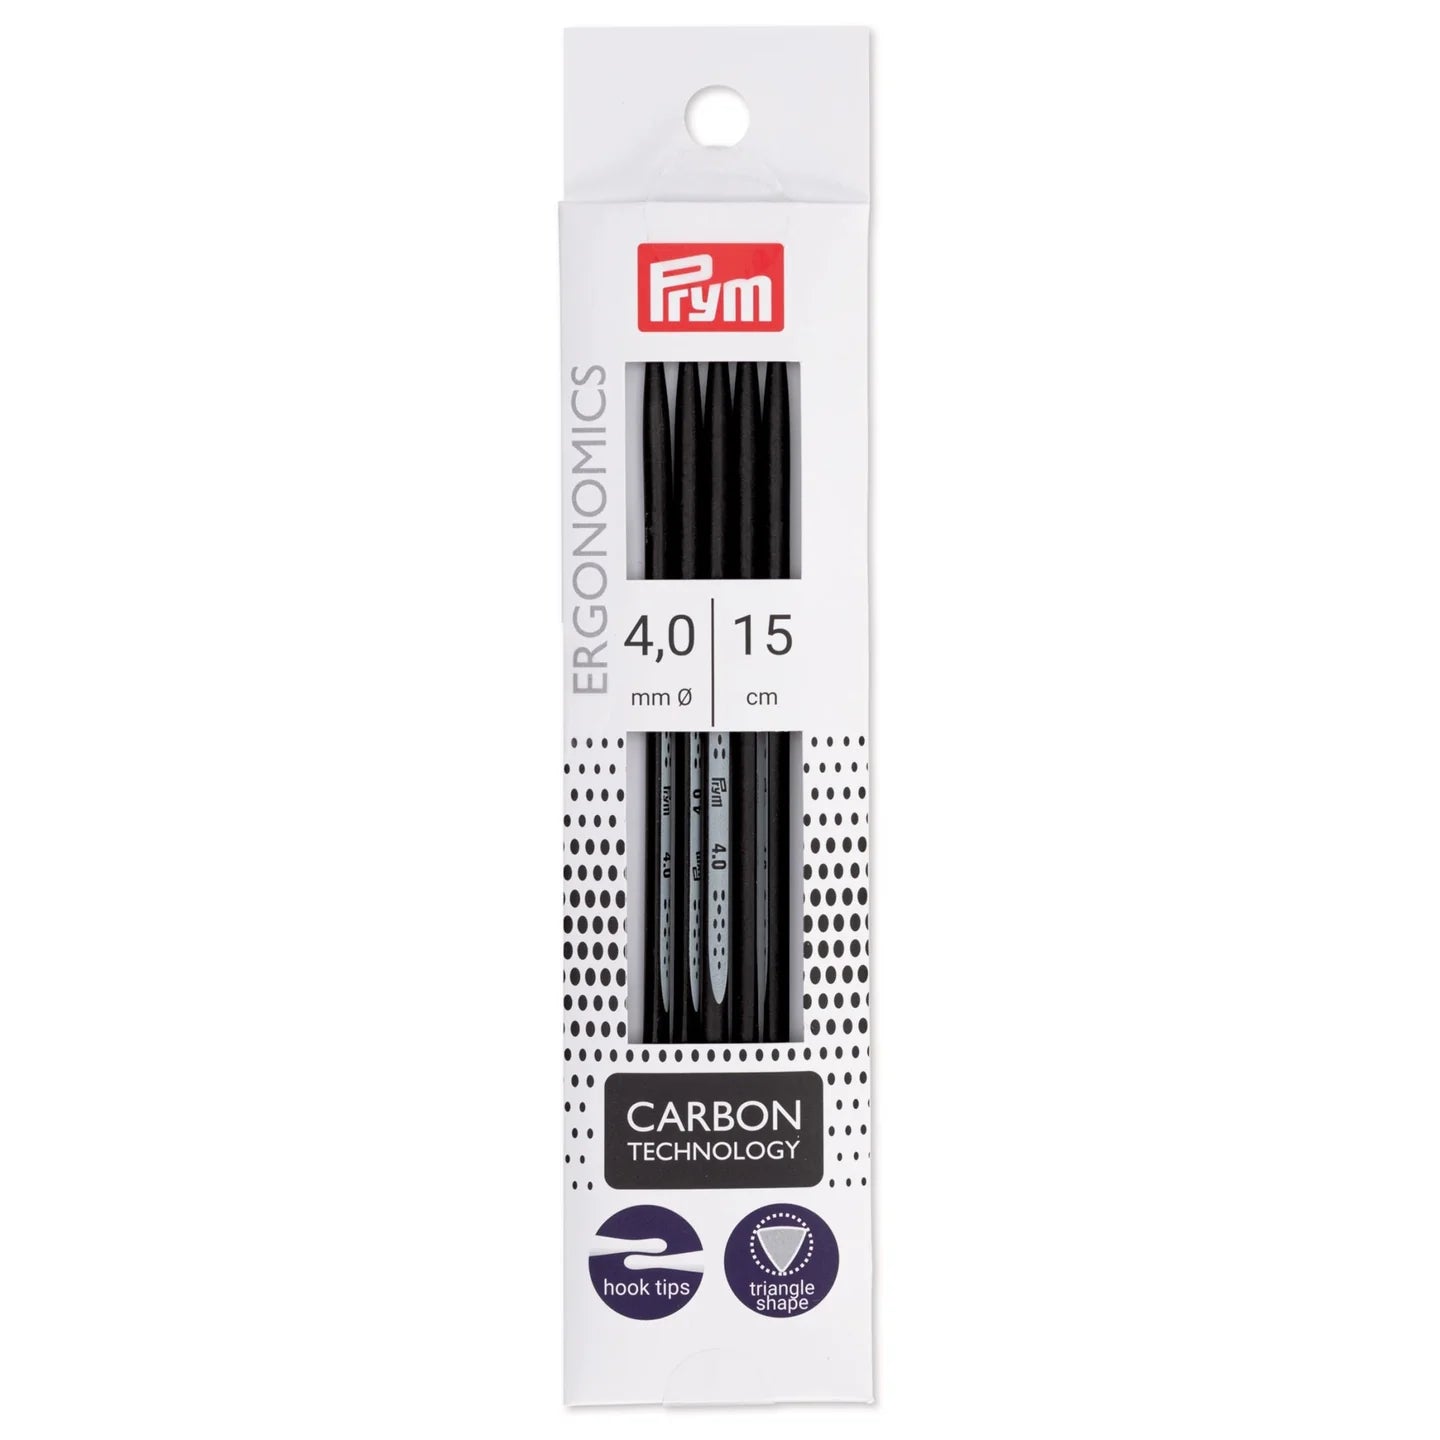 Prym Carbon Ergonomics 8 Double Pointed Needles – Scratch Supply Co.